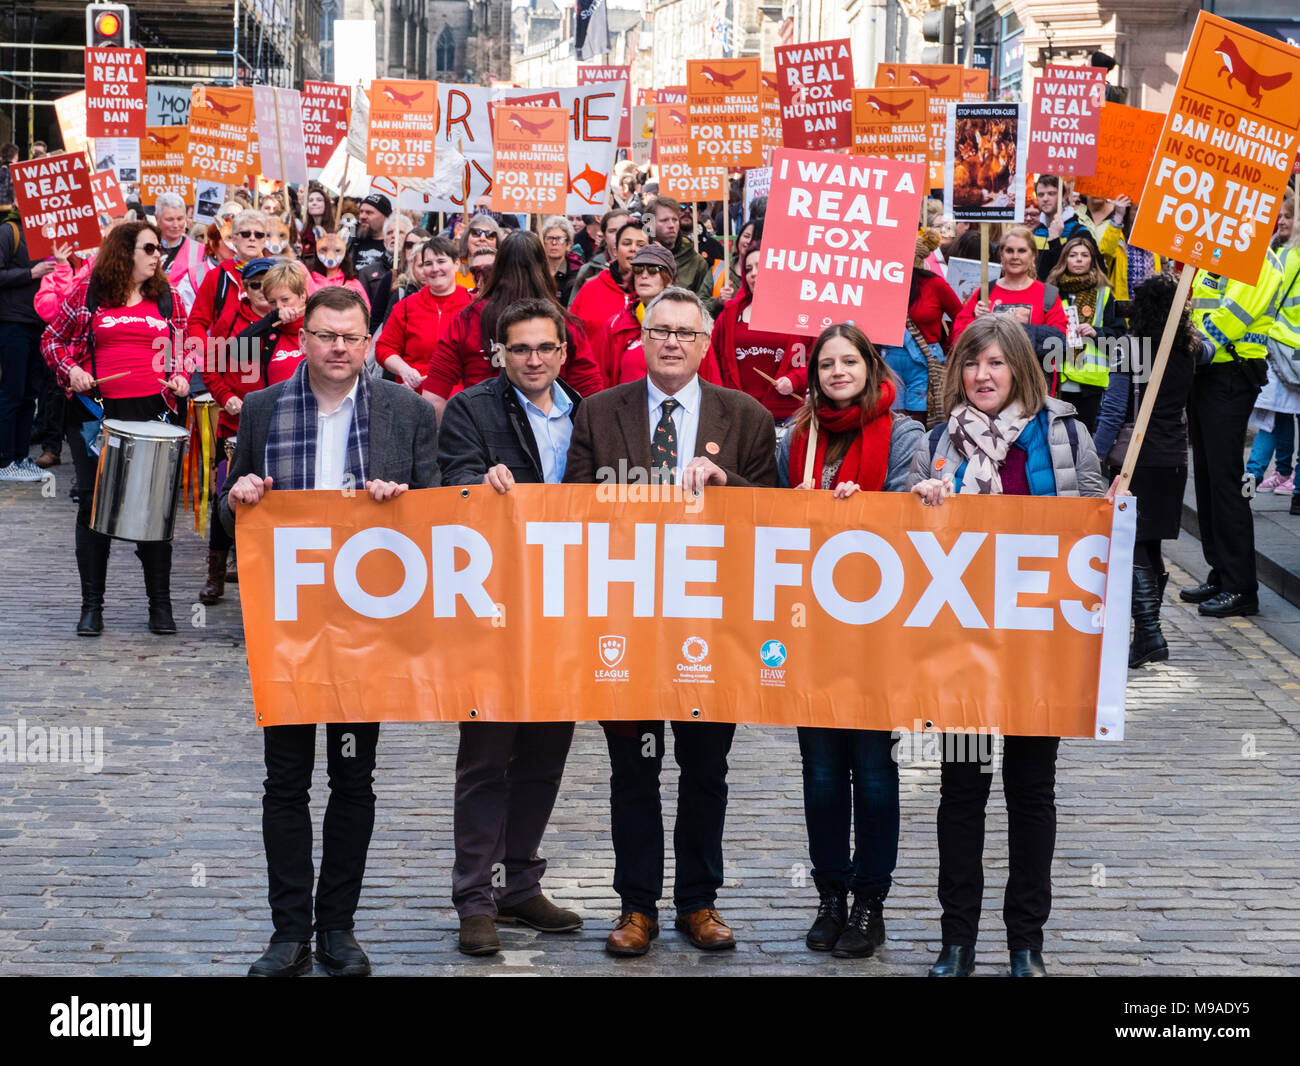 Edinburgh, Scotland,UK. 24 March 2018. For the Foxes March in Edinburgh City Centre. Protest march organised by groups such as League Against Cruel Sports and IFAW, to campaign for a ban on fox hunting in Scotland. Credit: Iain Masterton/Alamy Live News Stock Photo